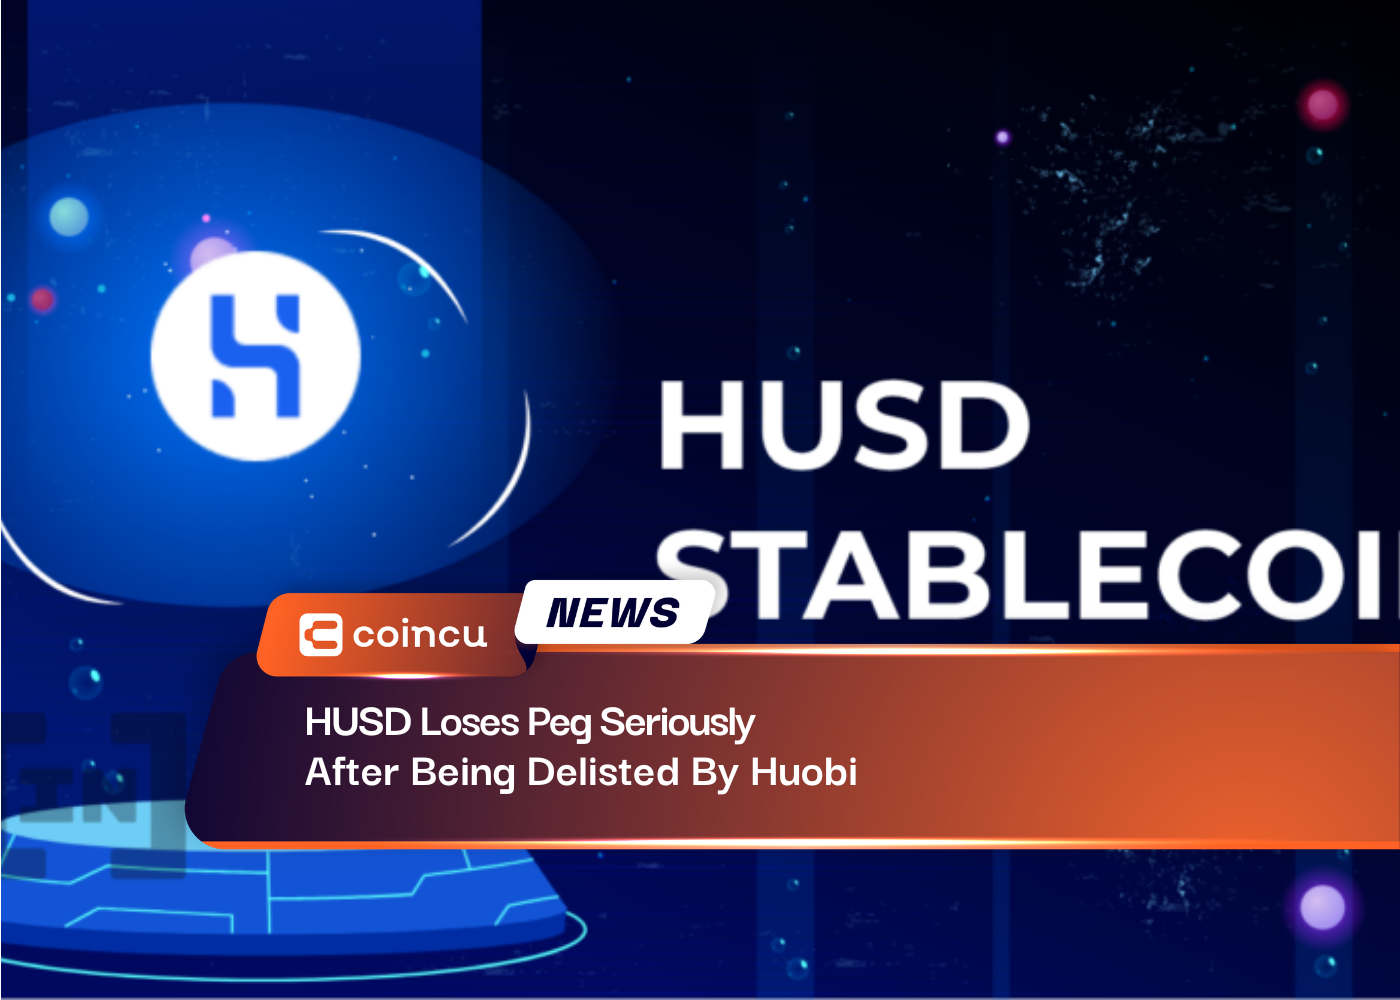 HUSD Loses Peg Seriously After Being Delisted By Huobi